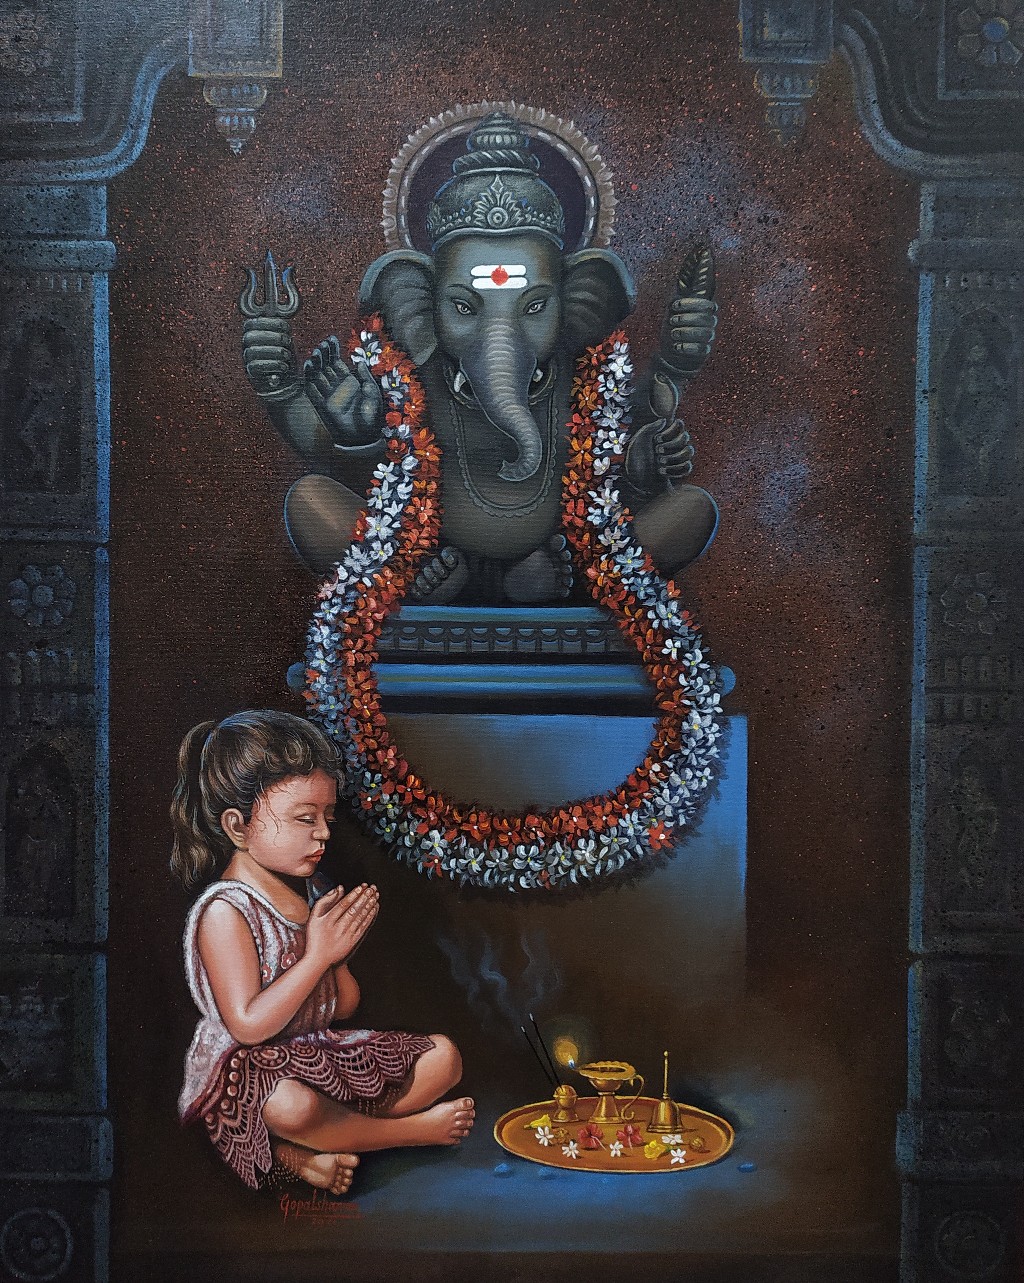 This acrylic painting of a little girl praying to Lord Ganesha is a devotional painting.